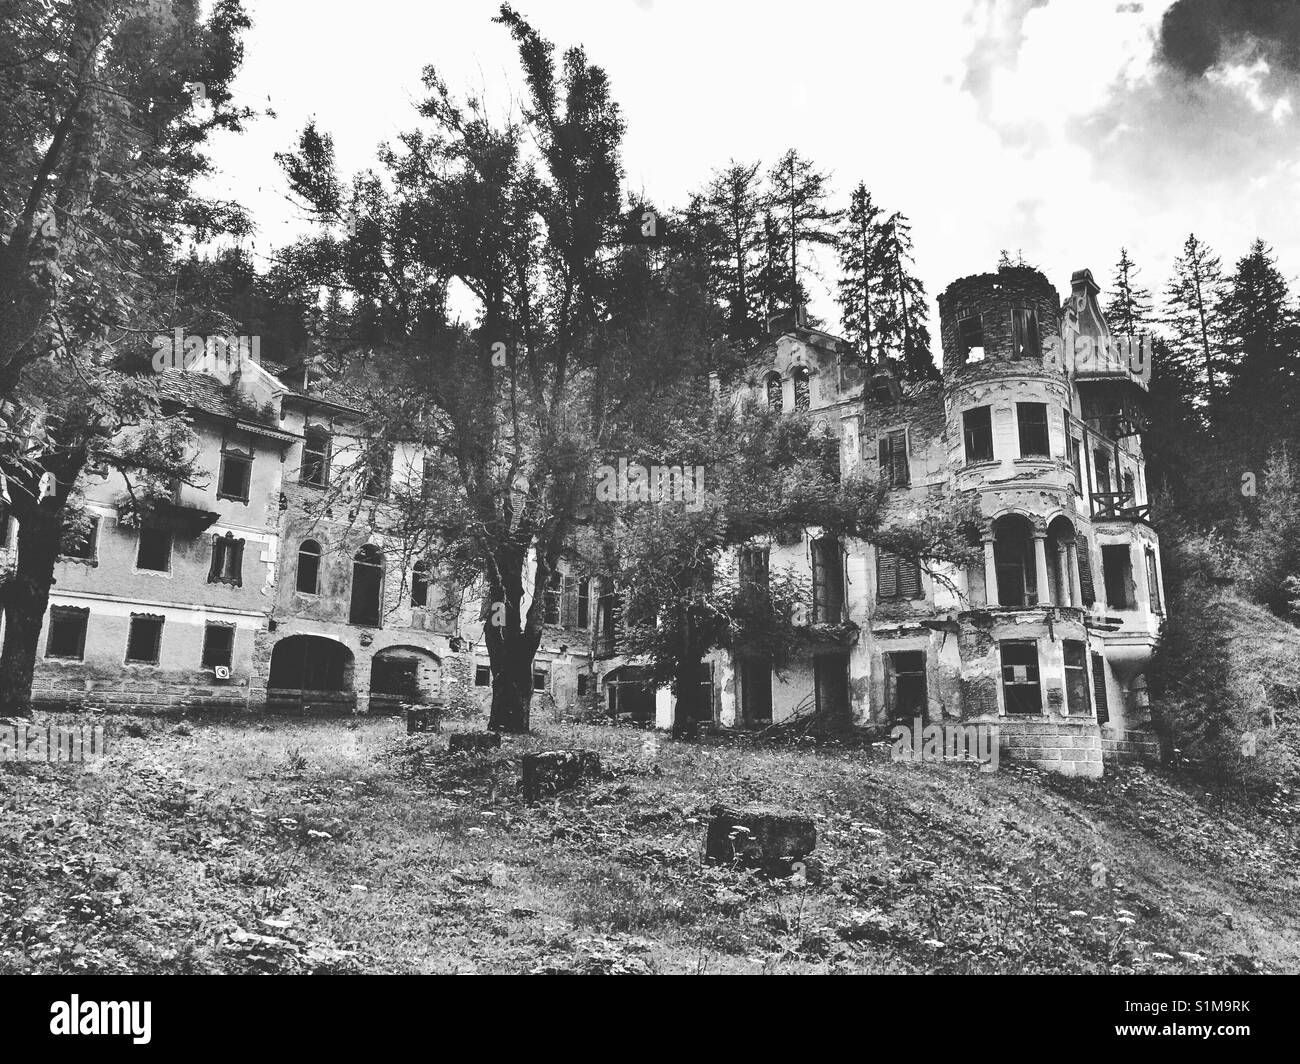 Ruins of ancient glory. Former Grand Hotel, Bagni di San Candido, Italy. Stock Photo